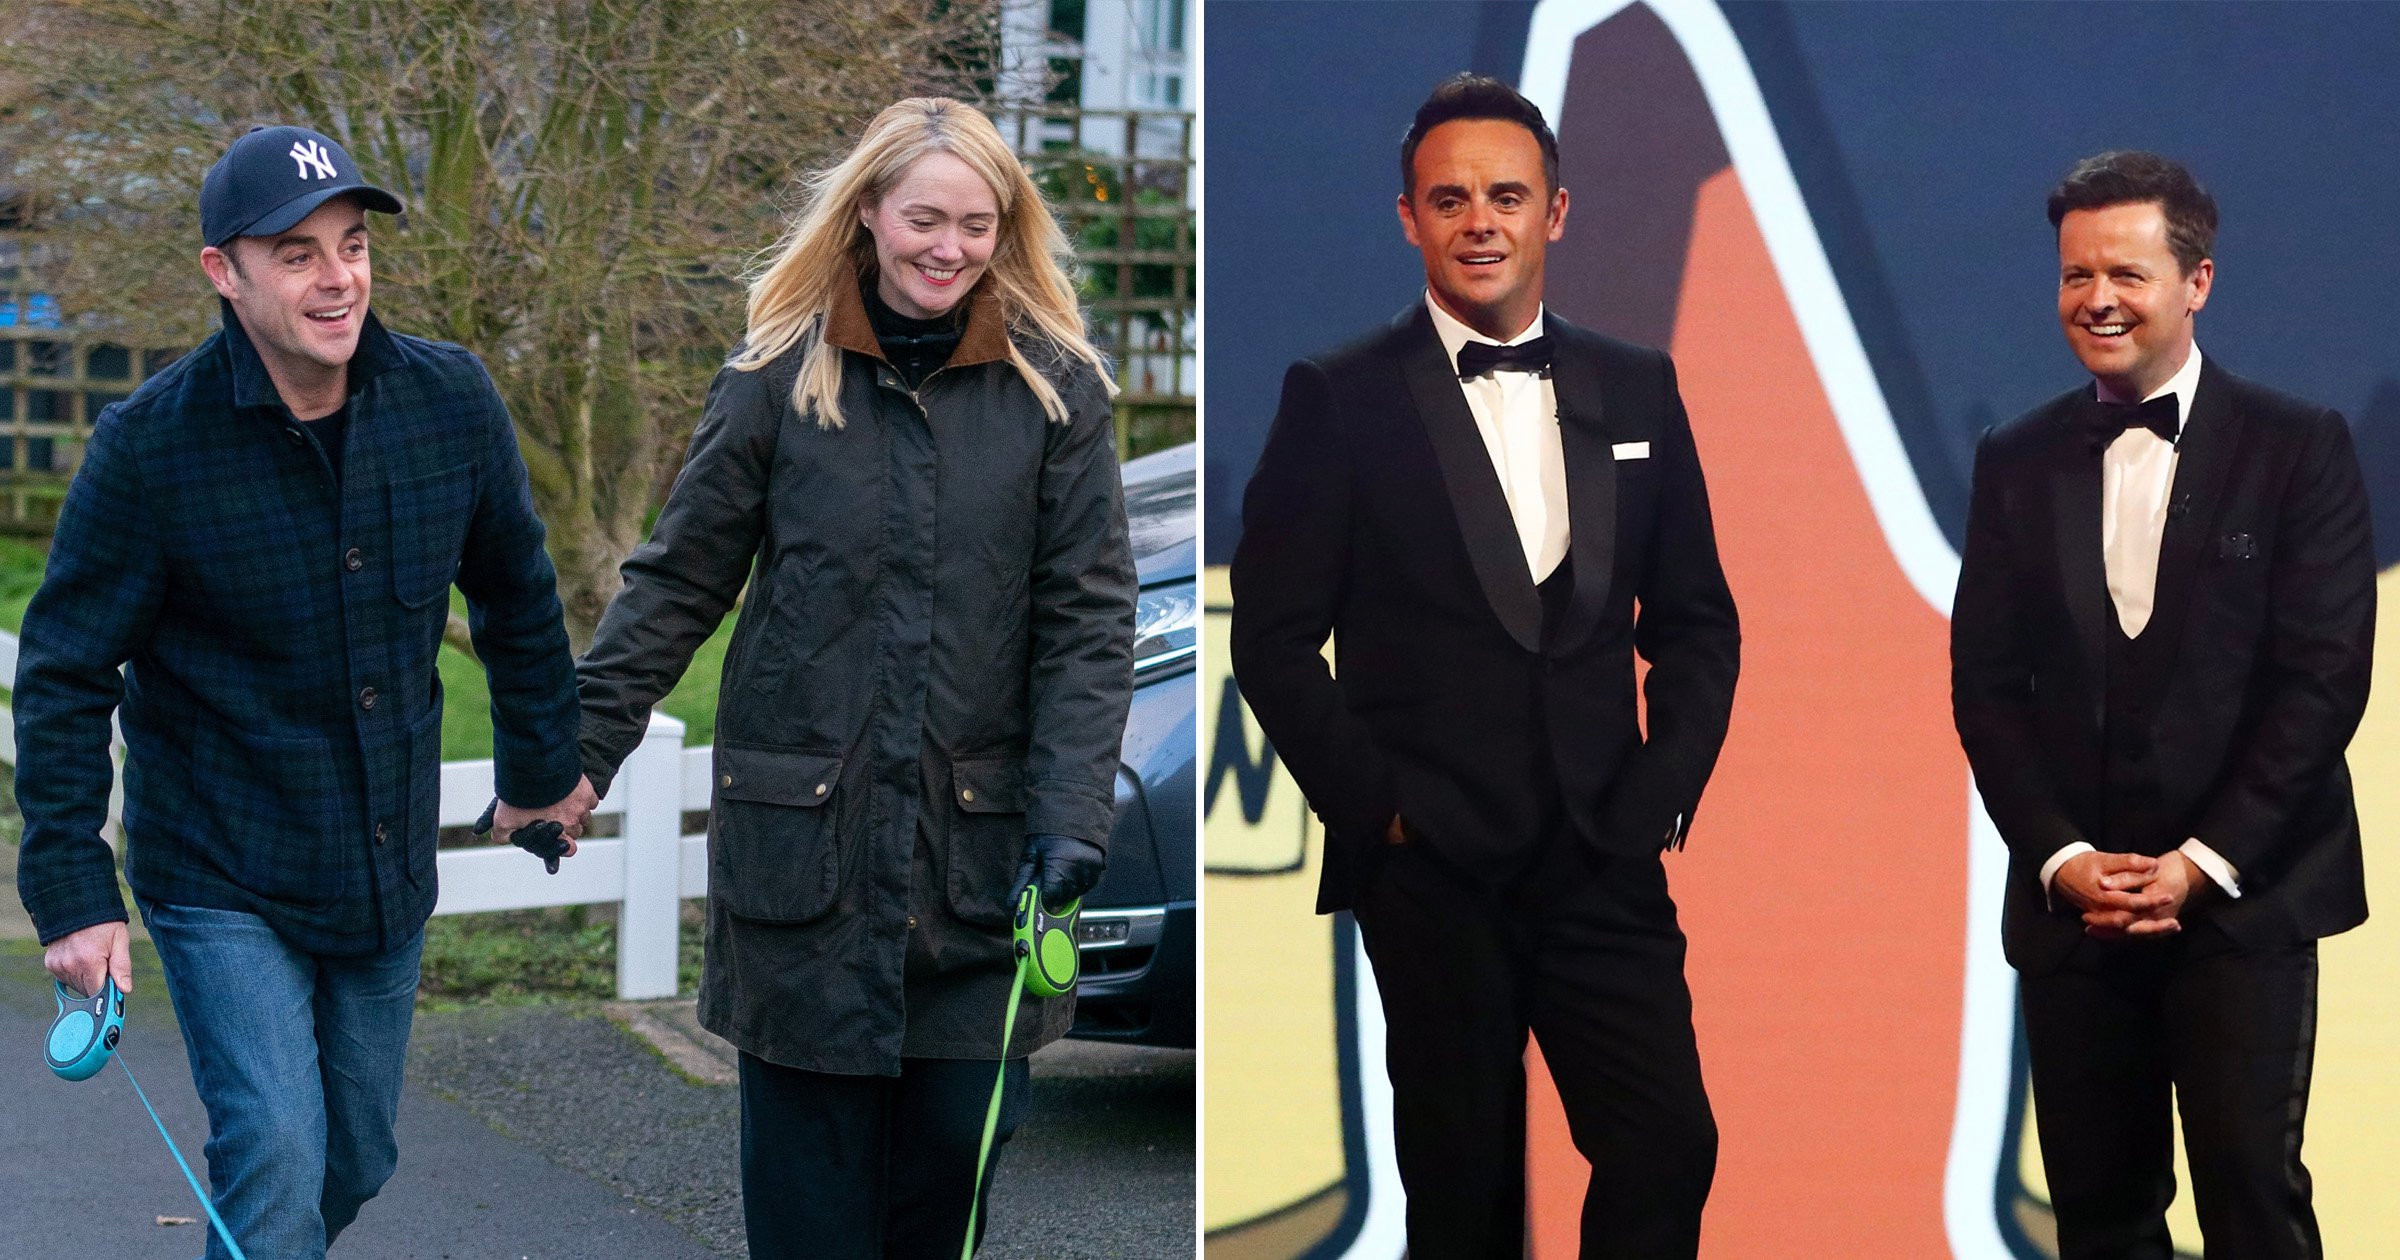 Ant McPartlin details romantic proposal to Anne-Marie Corbett: ‘There was flowers and afternoon tea’